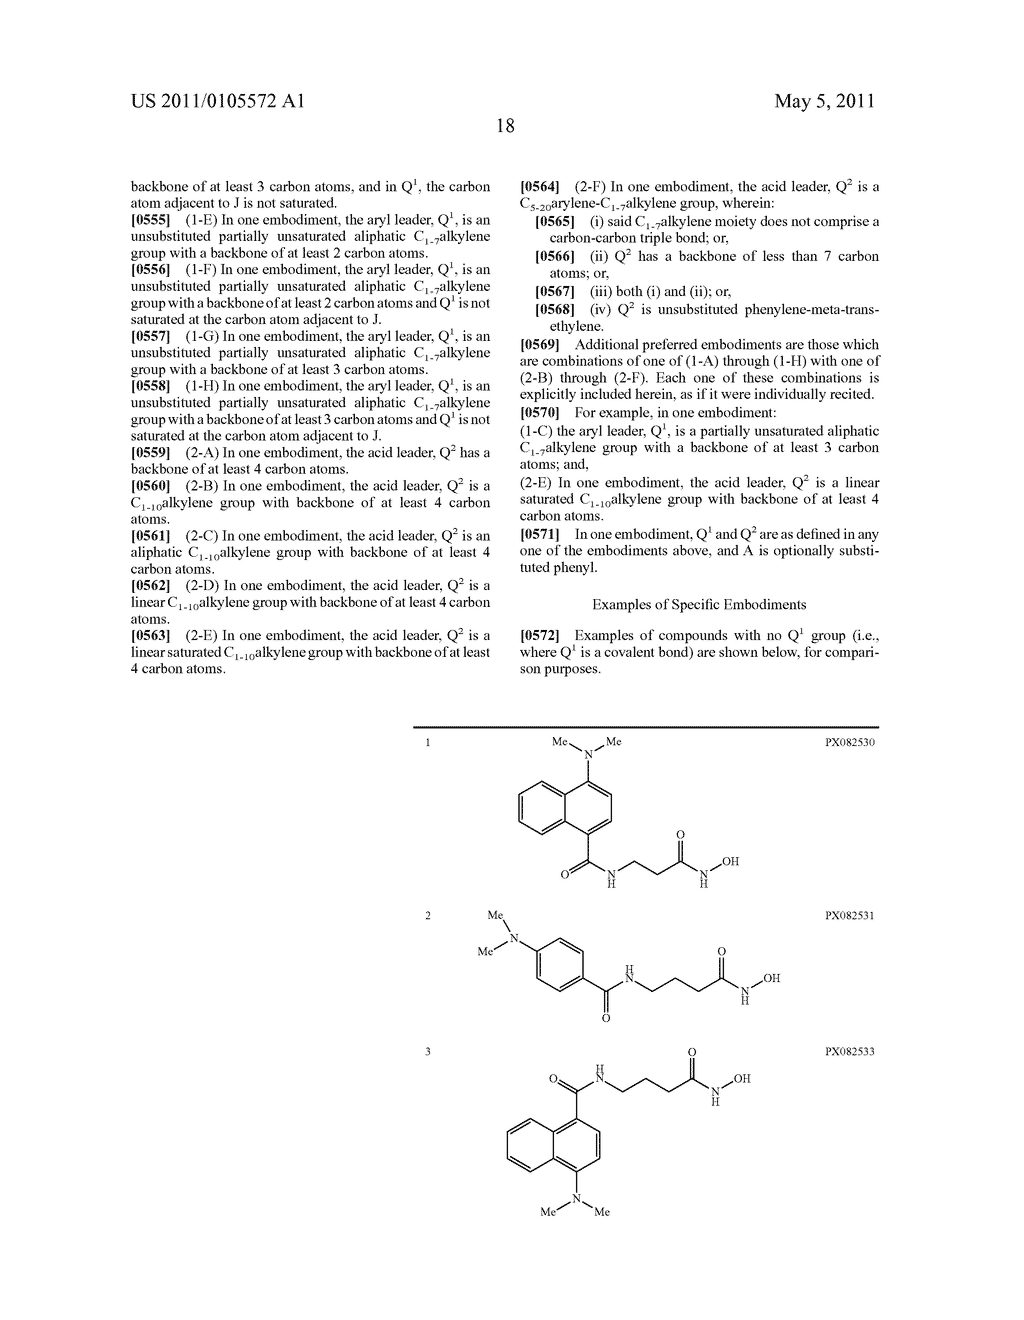 CARBAMIC ACID COMPOUNDS COMPRISING AN AMIDE LINKAGE AS HDAC INHIBITORS - diagram, schematic, and image 19